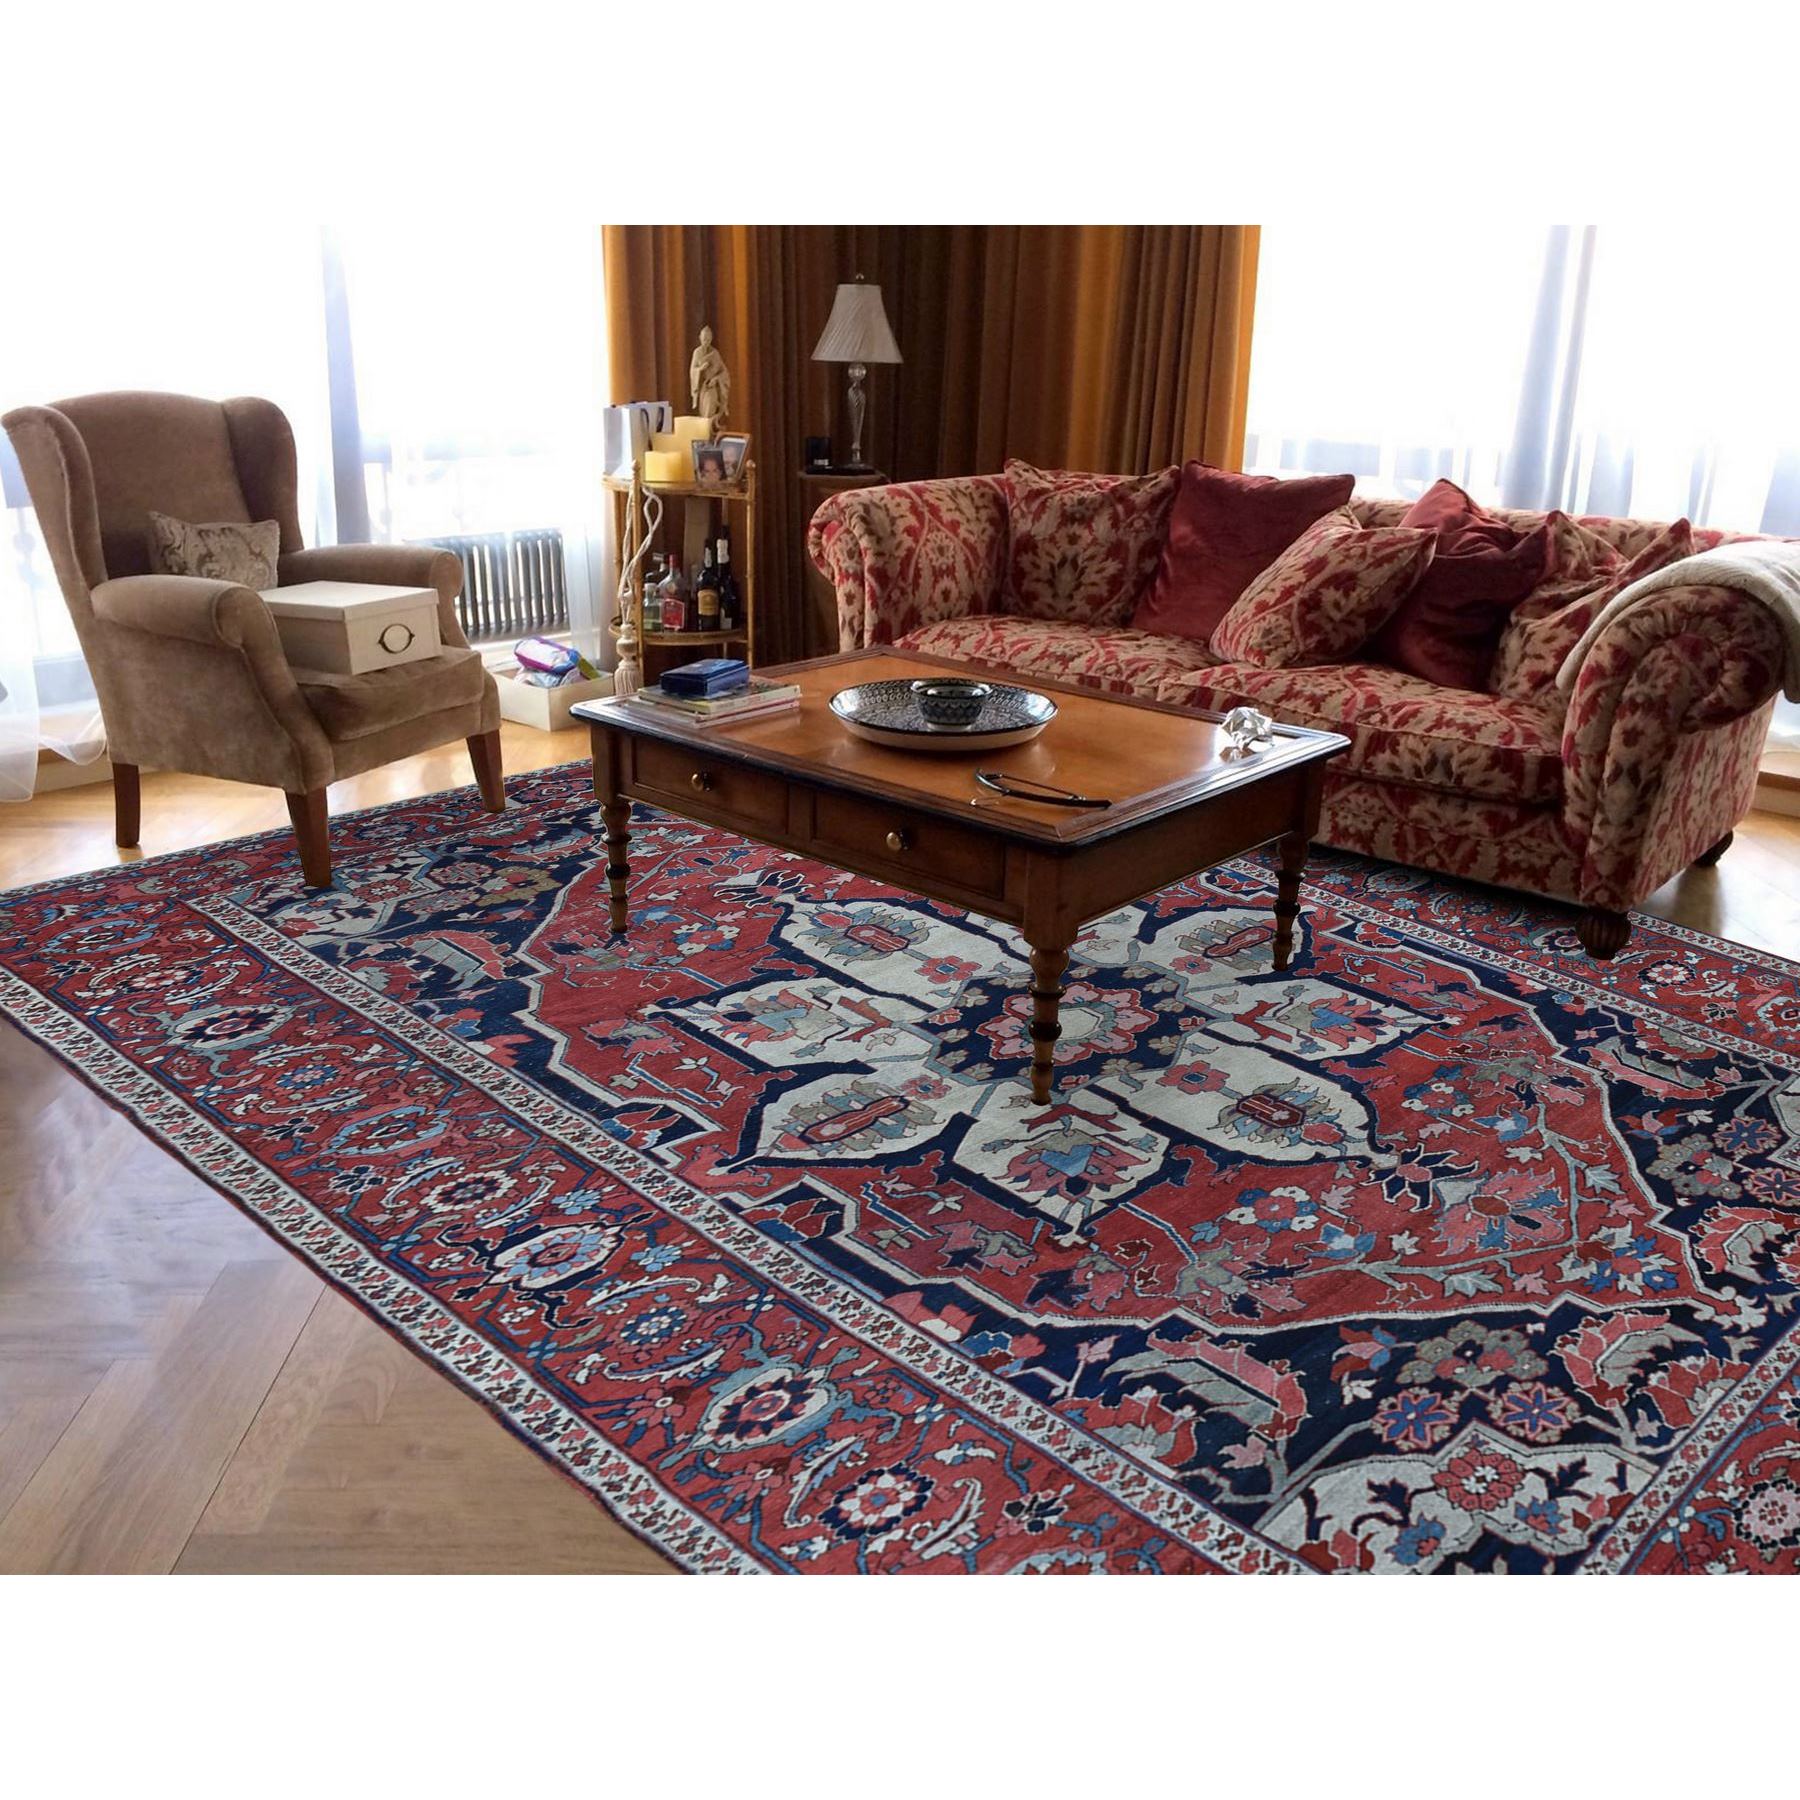 9'1"x13'1" Alabama Crimson, Antique Persian Serapi Heriz, Flower Medallion Design, Pure Wool, Sides and Ends Professionally Secured, Cleaned, Hand Woven, Oriental Rug 